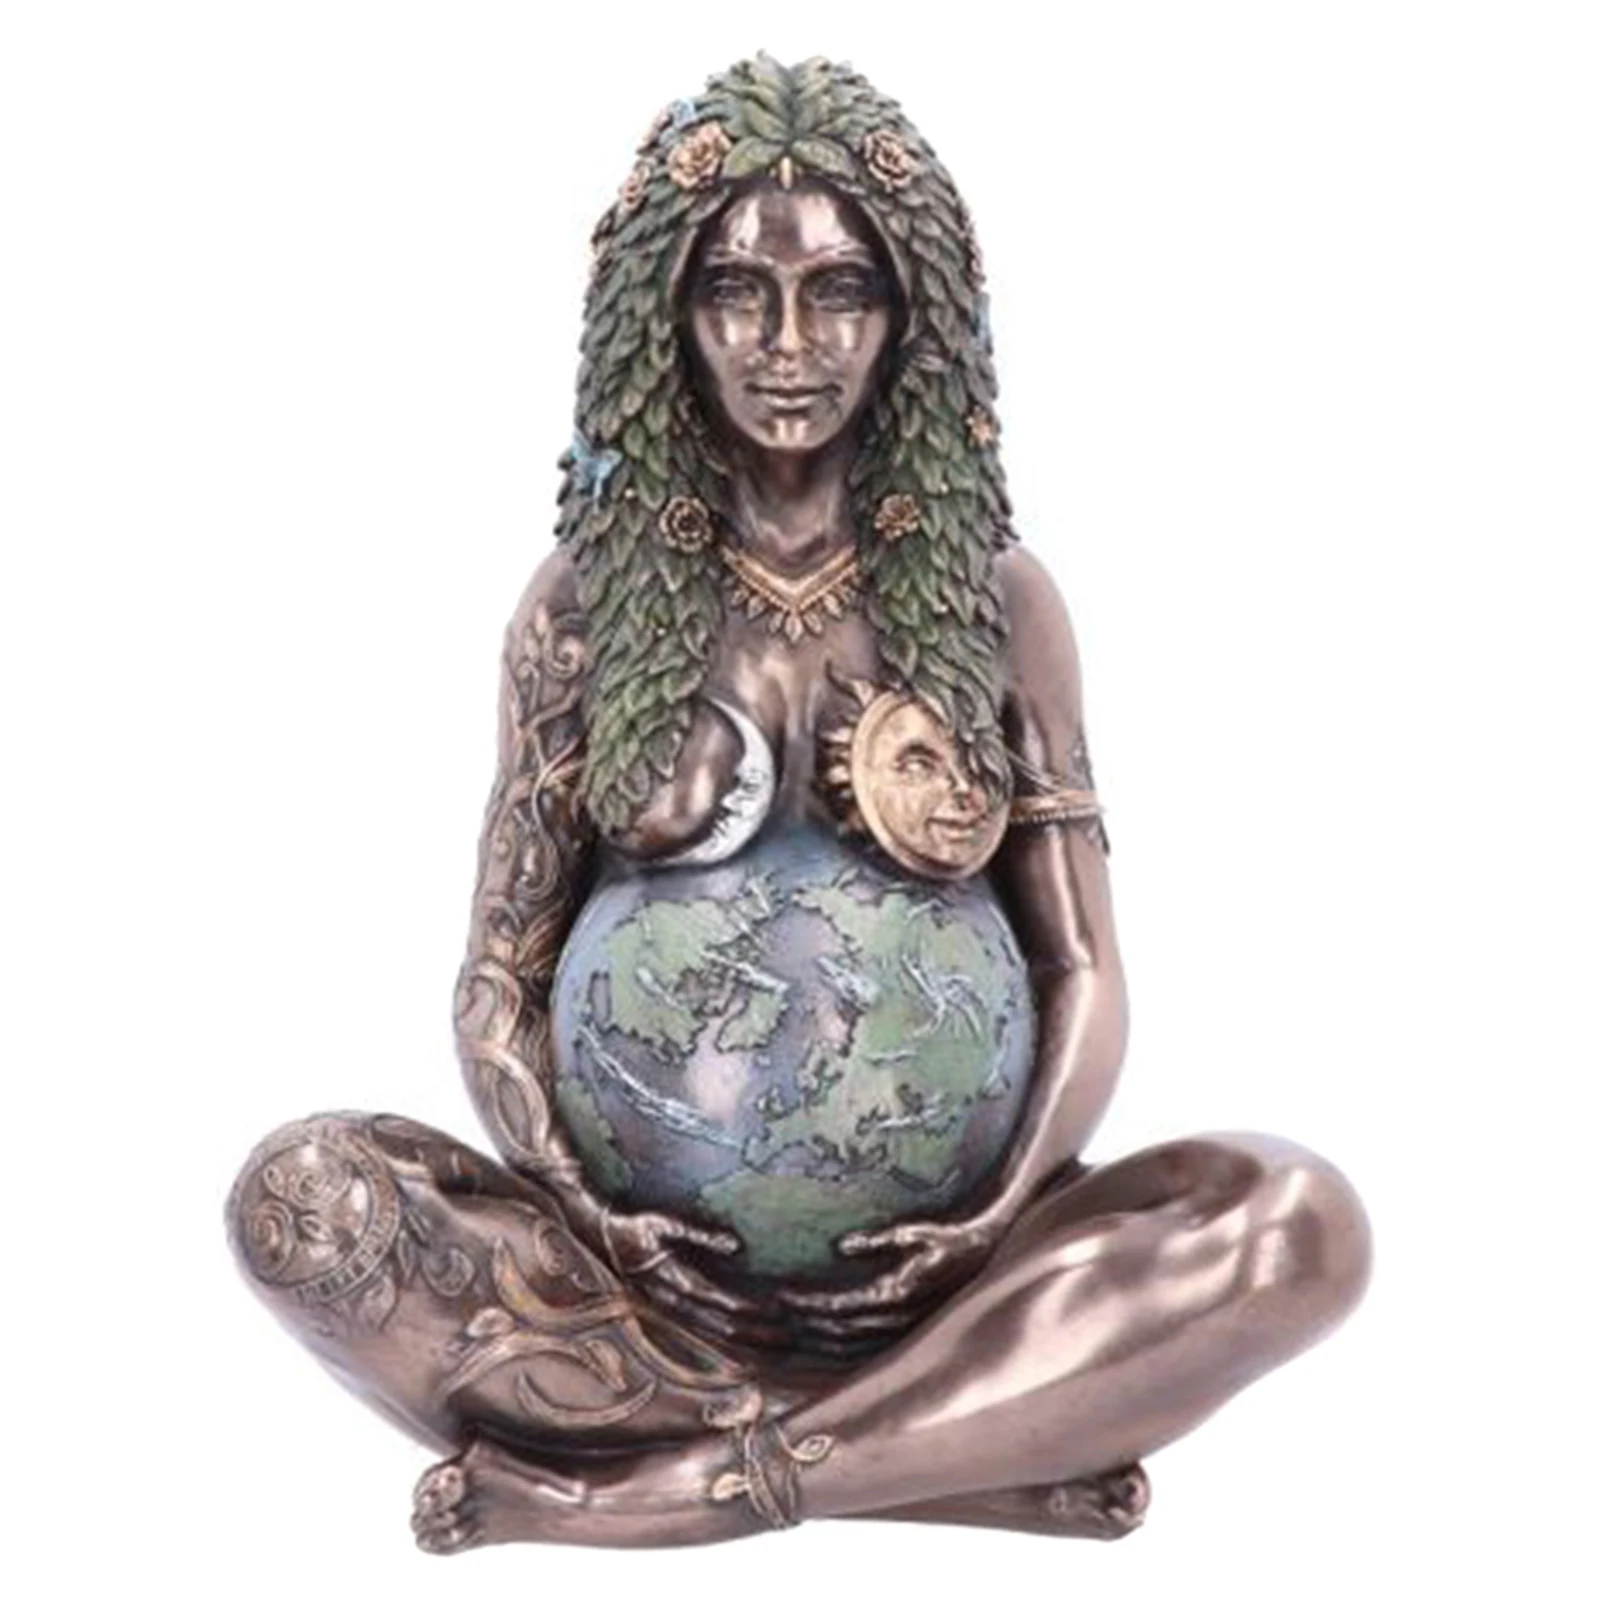 Mother Earth Goddess Statue Polyresin Figurine Mother Earth Statue 15CM Outdoor Decor Ornament Home Garden Decorative Polyresin Figurine Art Statue Yagerod Millennial Gaia Statue 